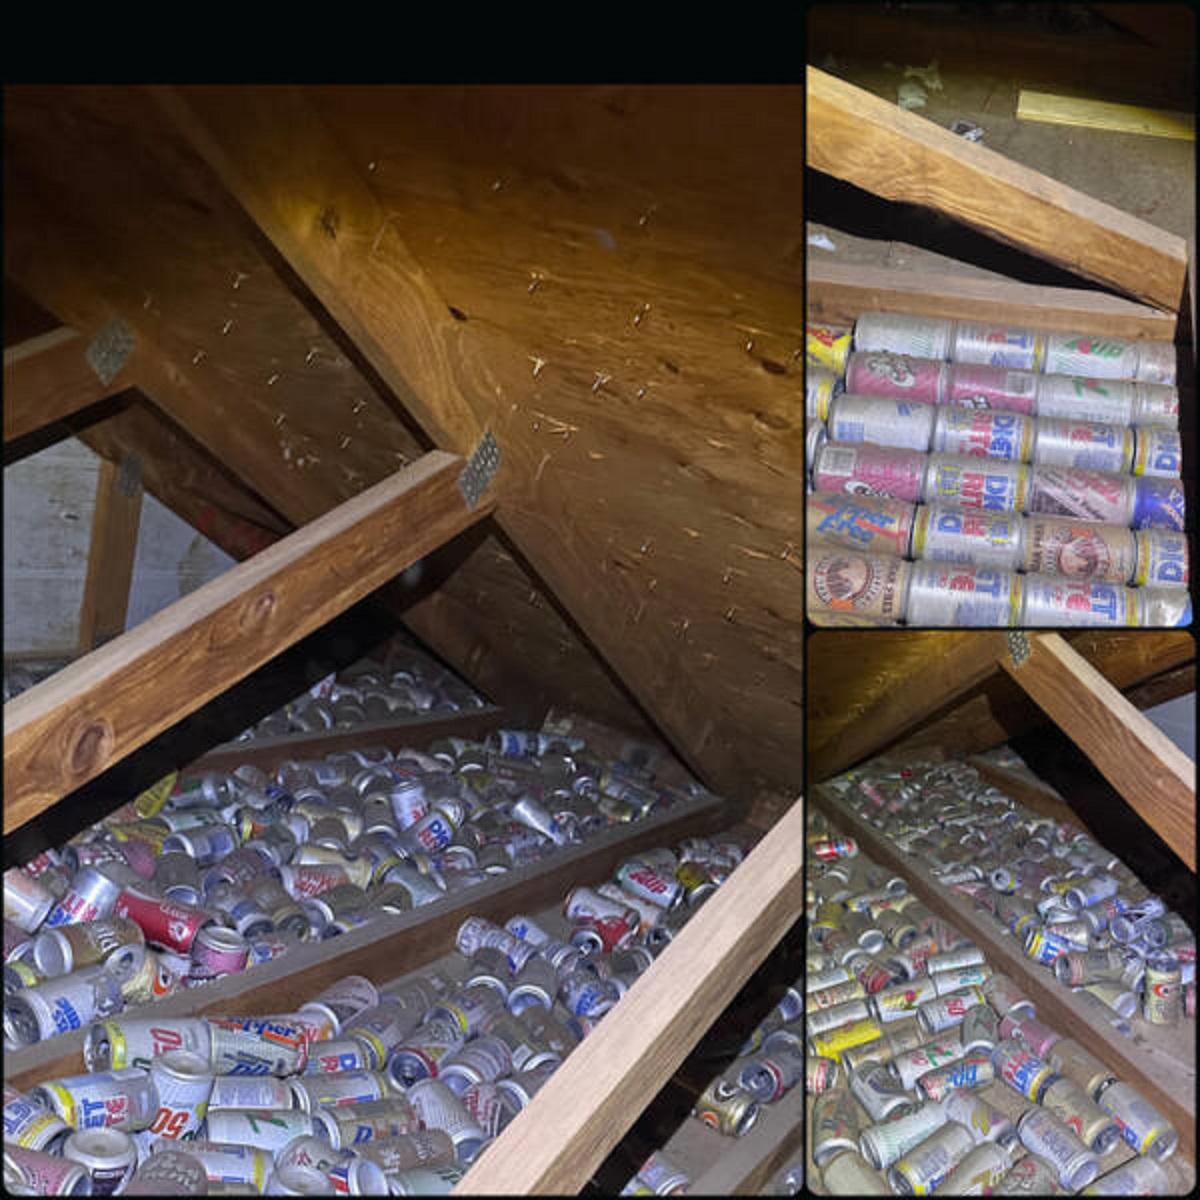 “Found an absolutely absurd amount of 30+ year old cans in the attic above my garage.”